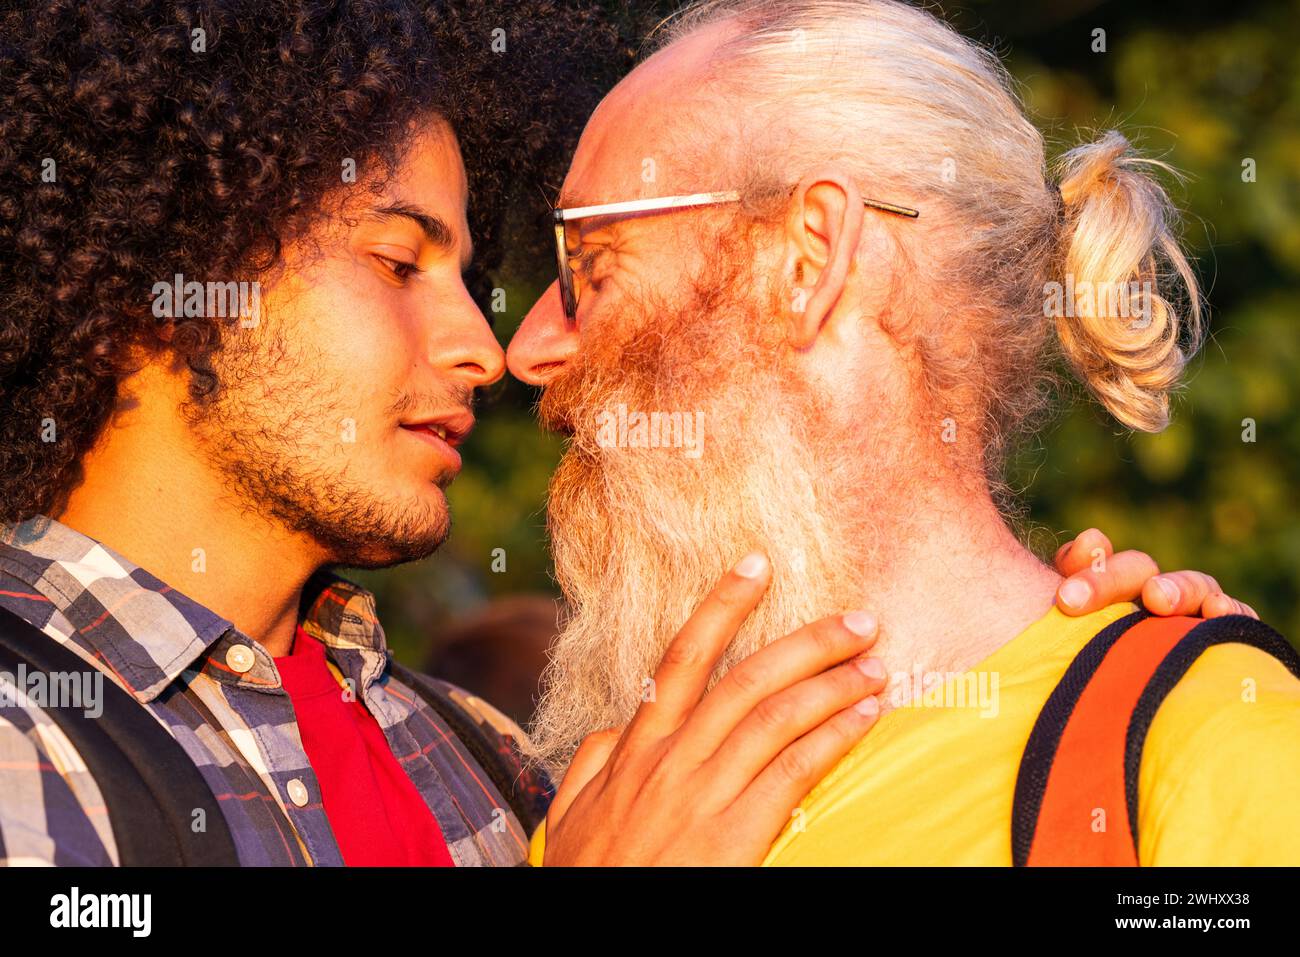 Intimate Sunset Moment, Gay Couple's Kiss Stock Photo